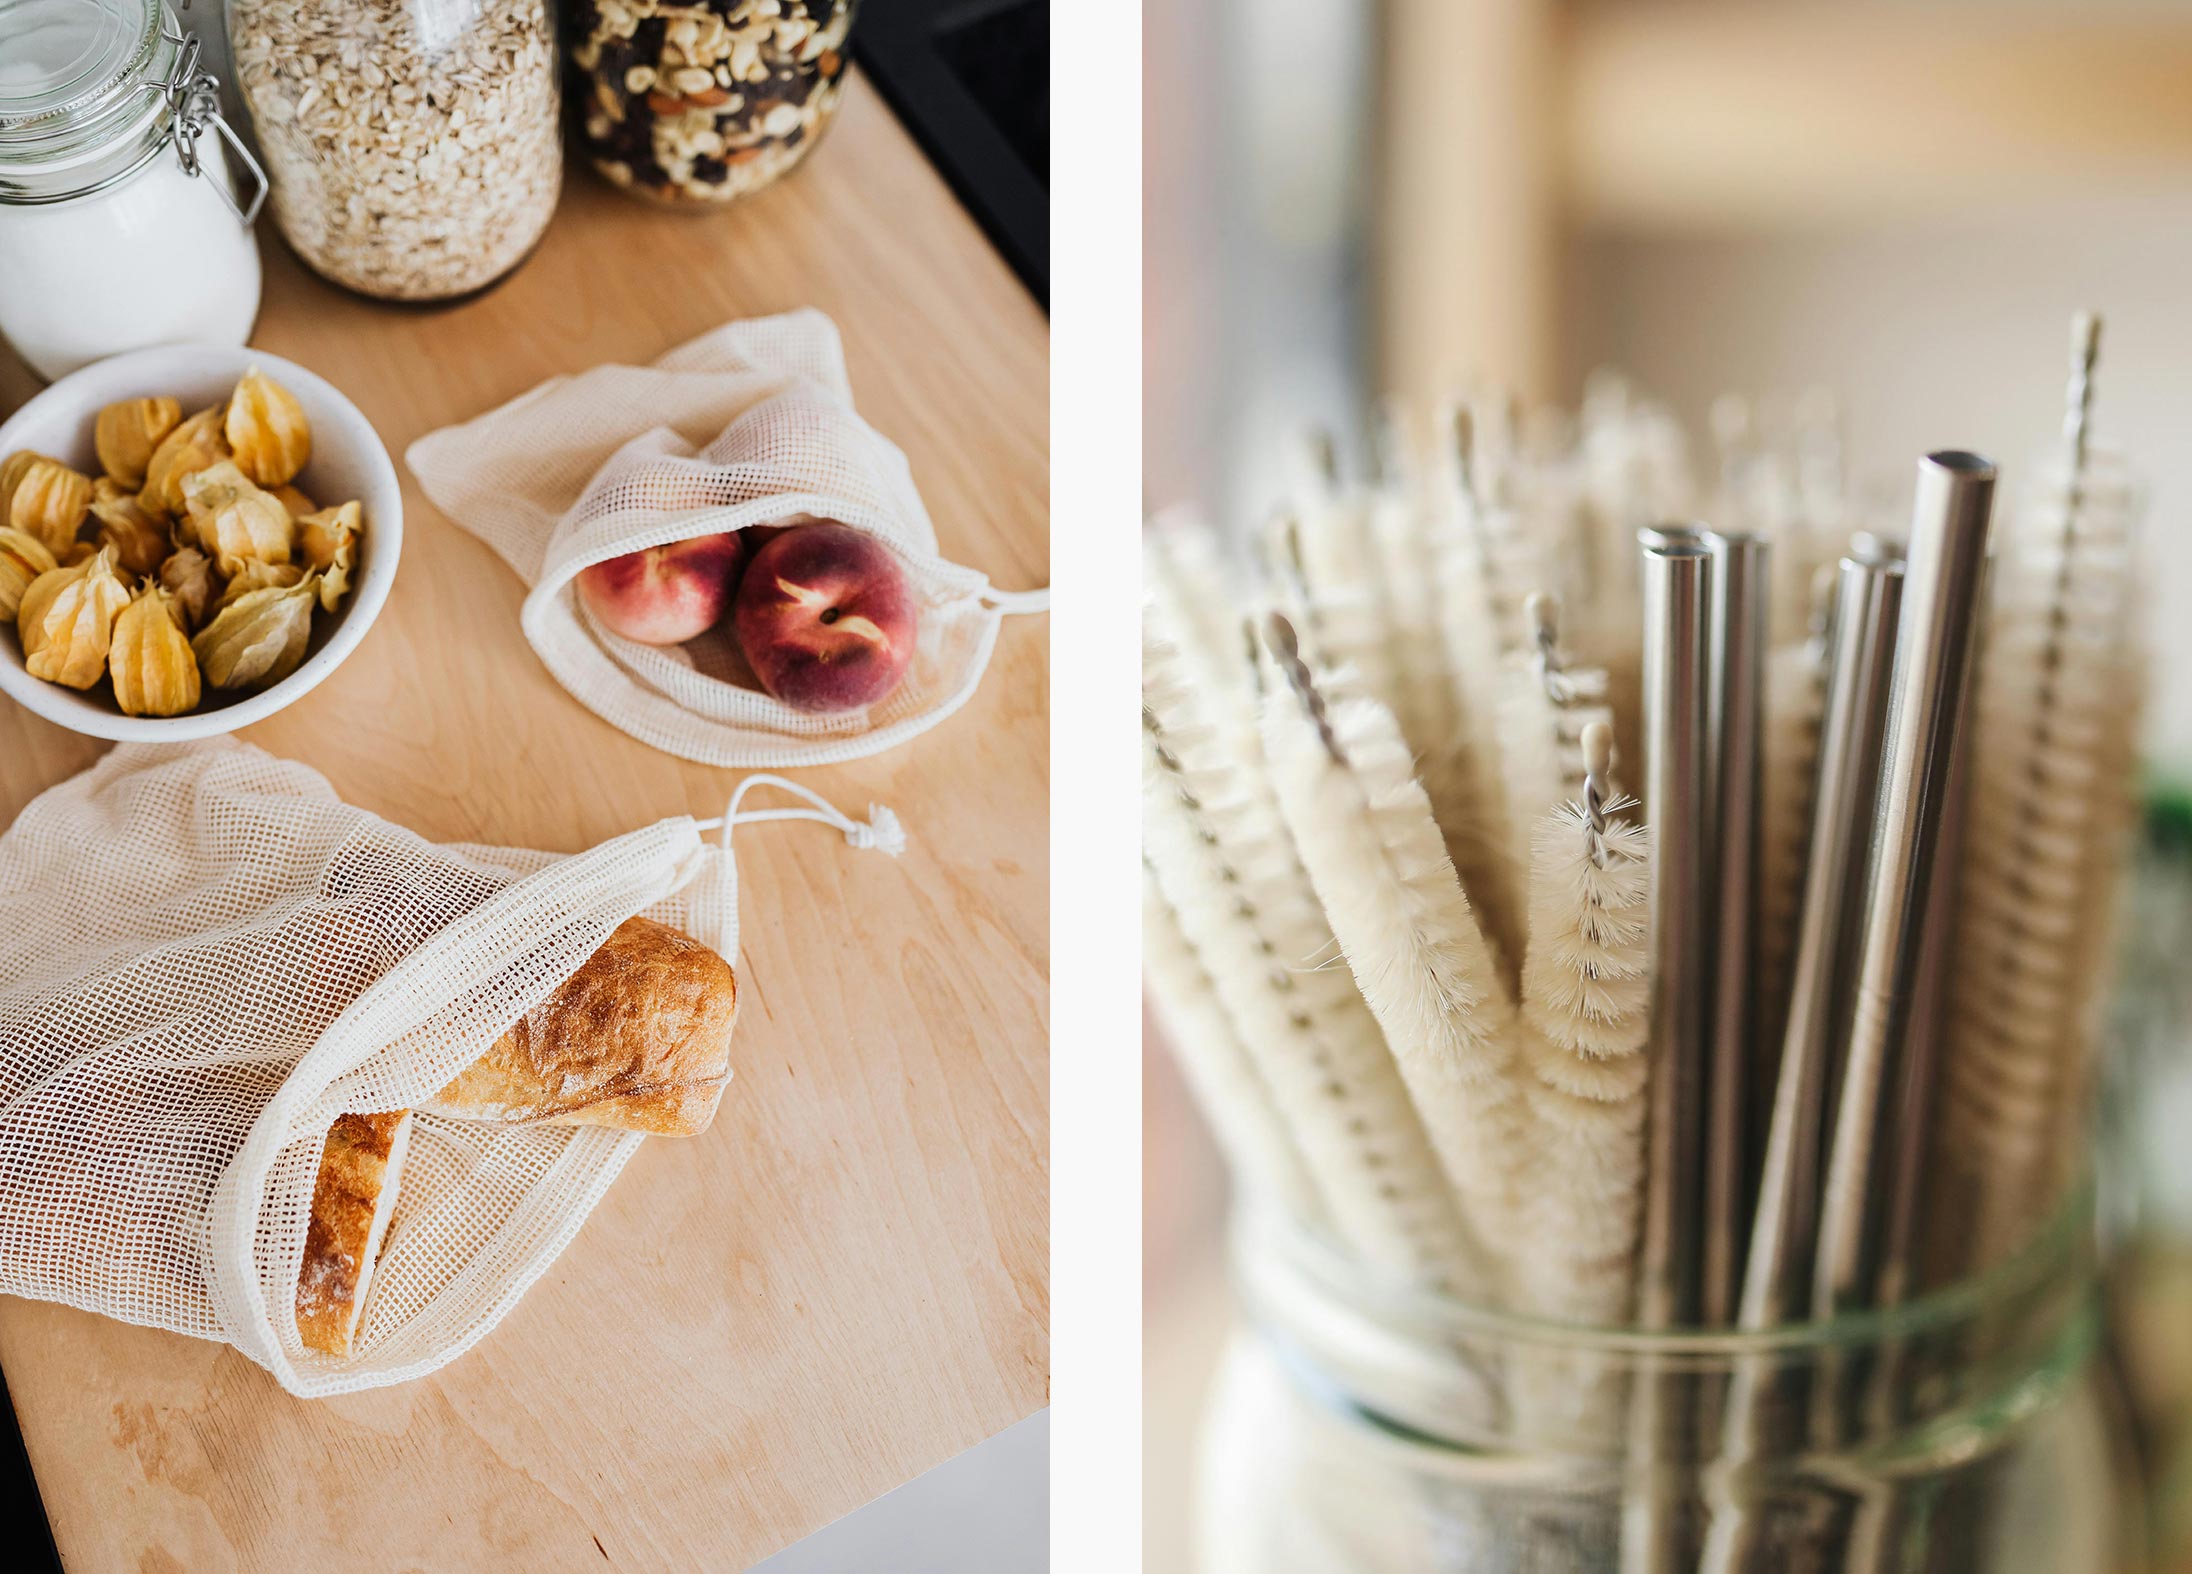 Eco-friendly reusable food packaging and straws